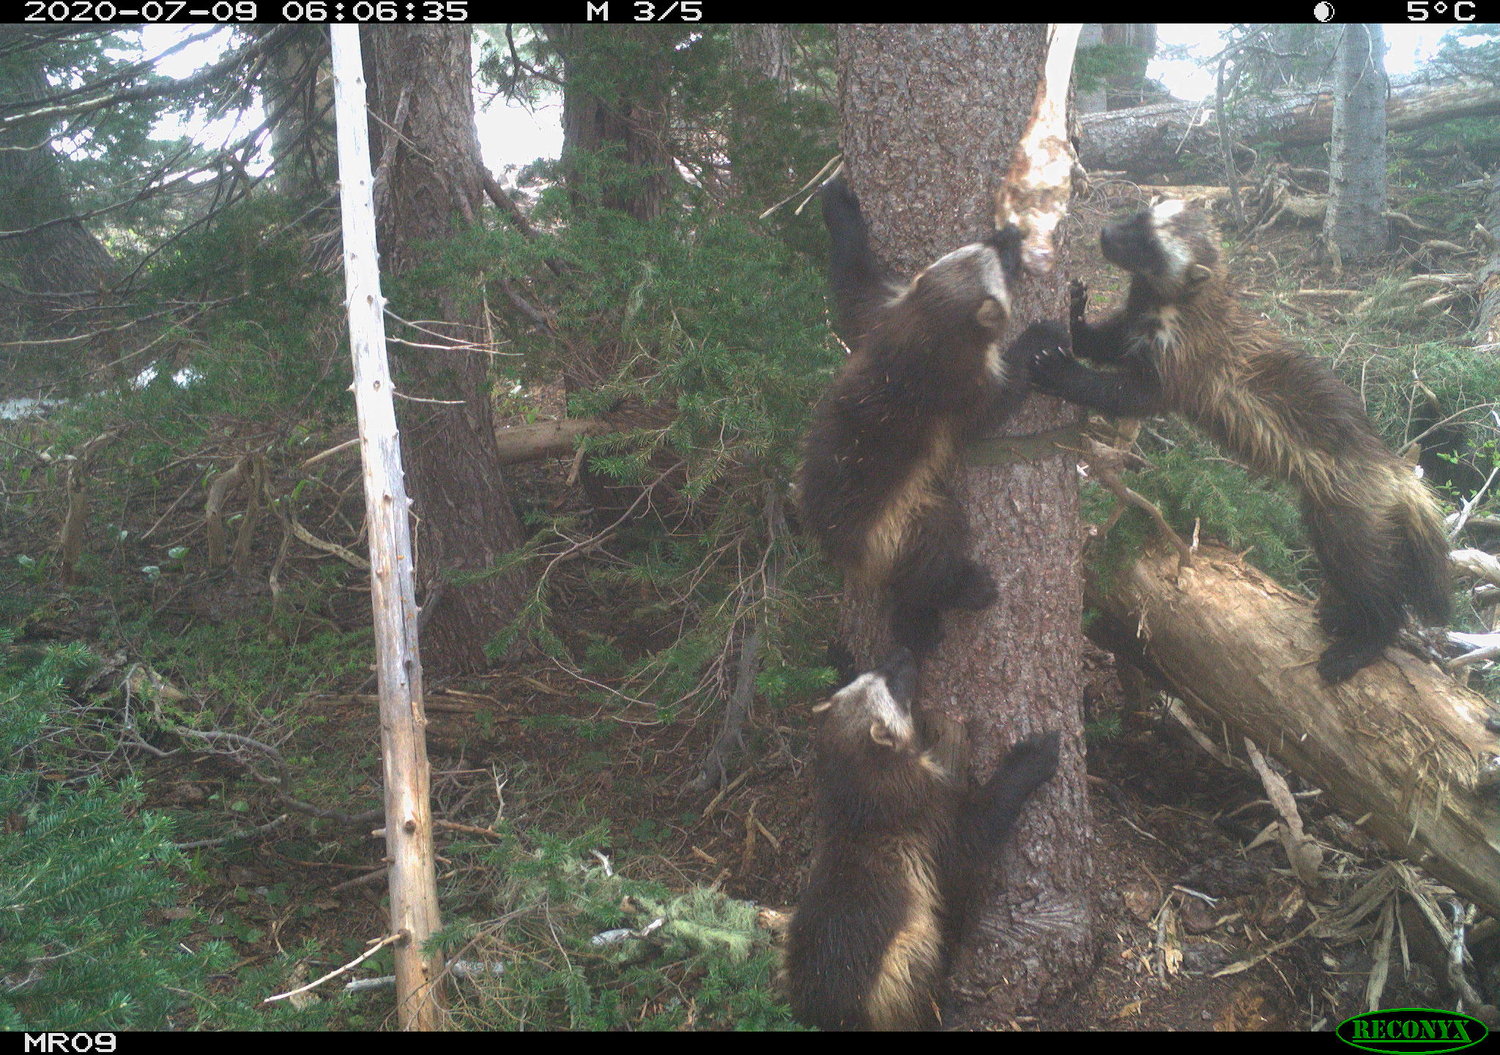 Wolverine Family at Mount Rainier National Park.Additional photos available on this Flickr album: https://www.flickr.com/photos/mountrainiernps/sets/72157715557273077/